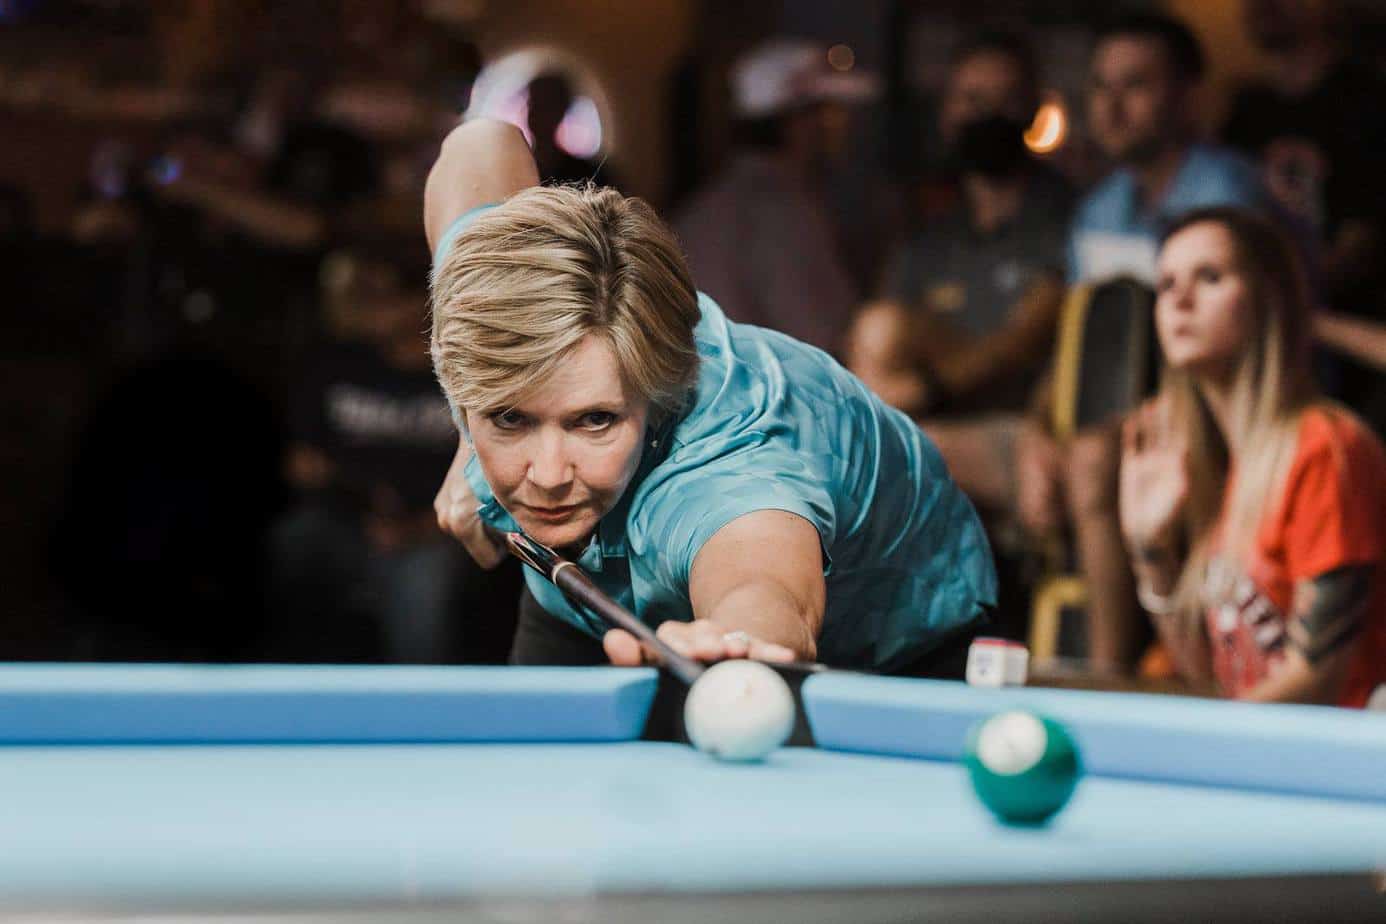 Allison Fisher focuses on a game of pool